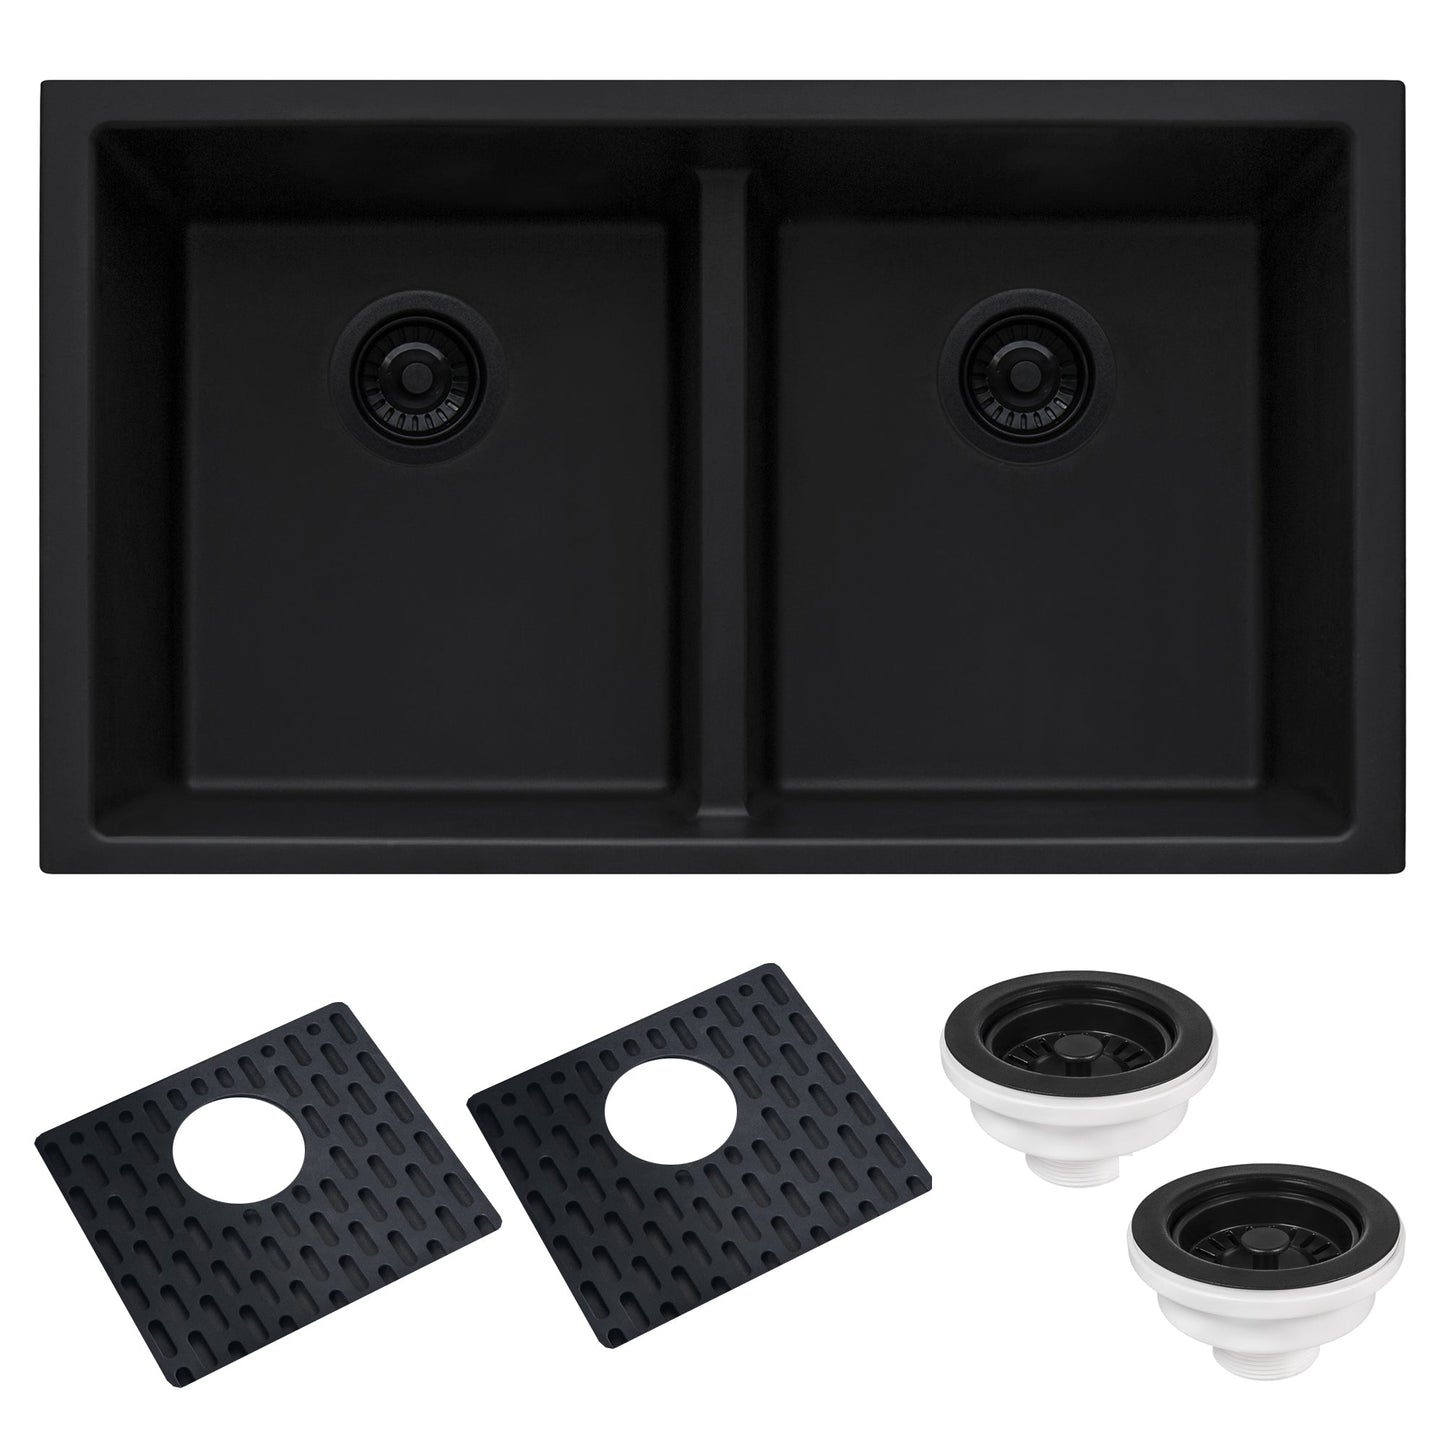 Ruvati epiGranite 33" x 19" Midnight Black Undermount Granite 50/50 Double Bowl Low Divide Kitchen Sink With Basket Strainer, Bottom Rinse Grid and Drain Assembly